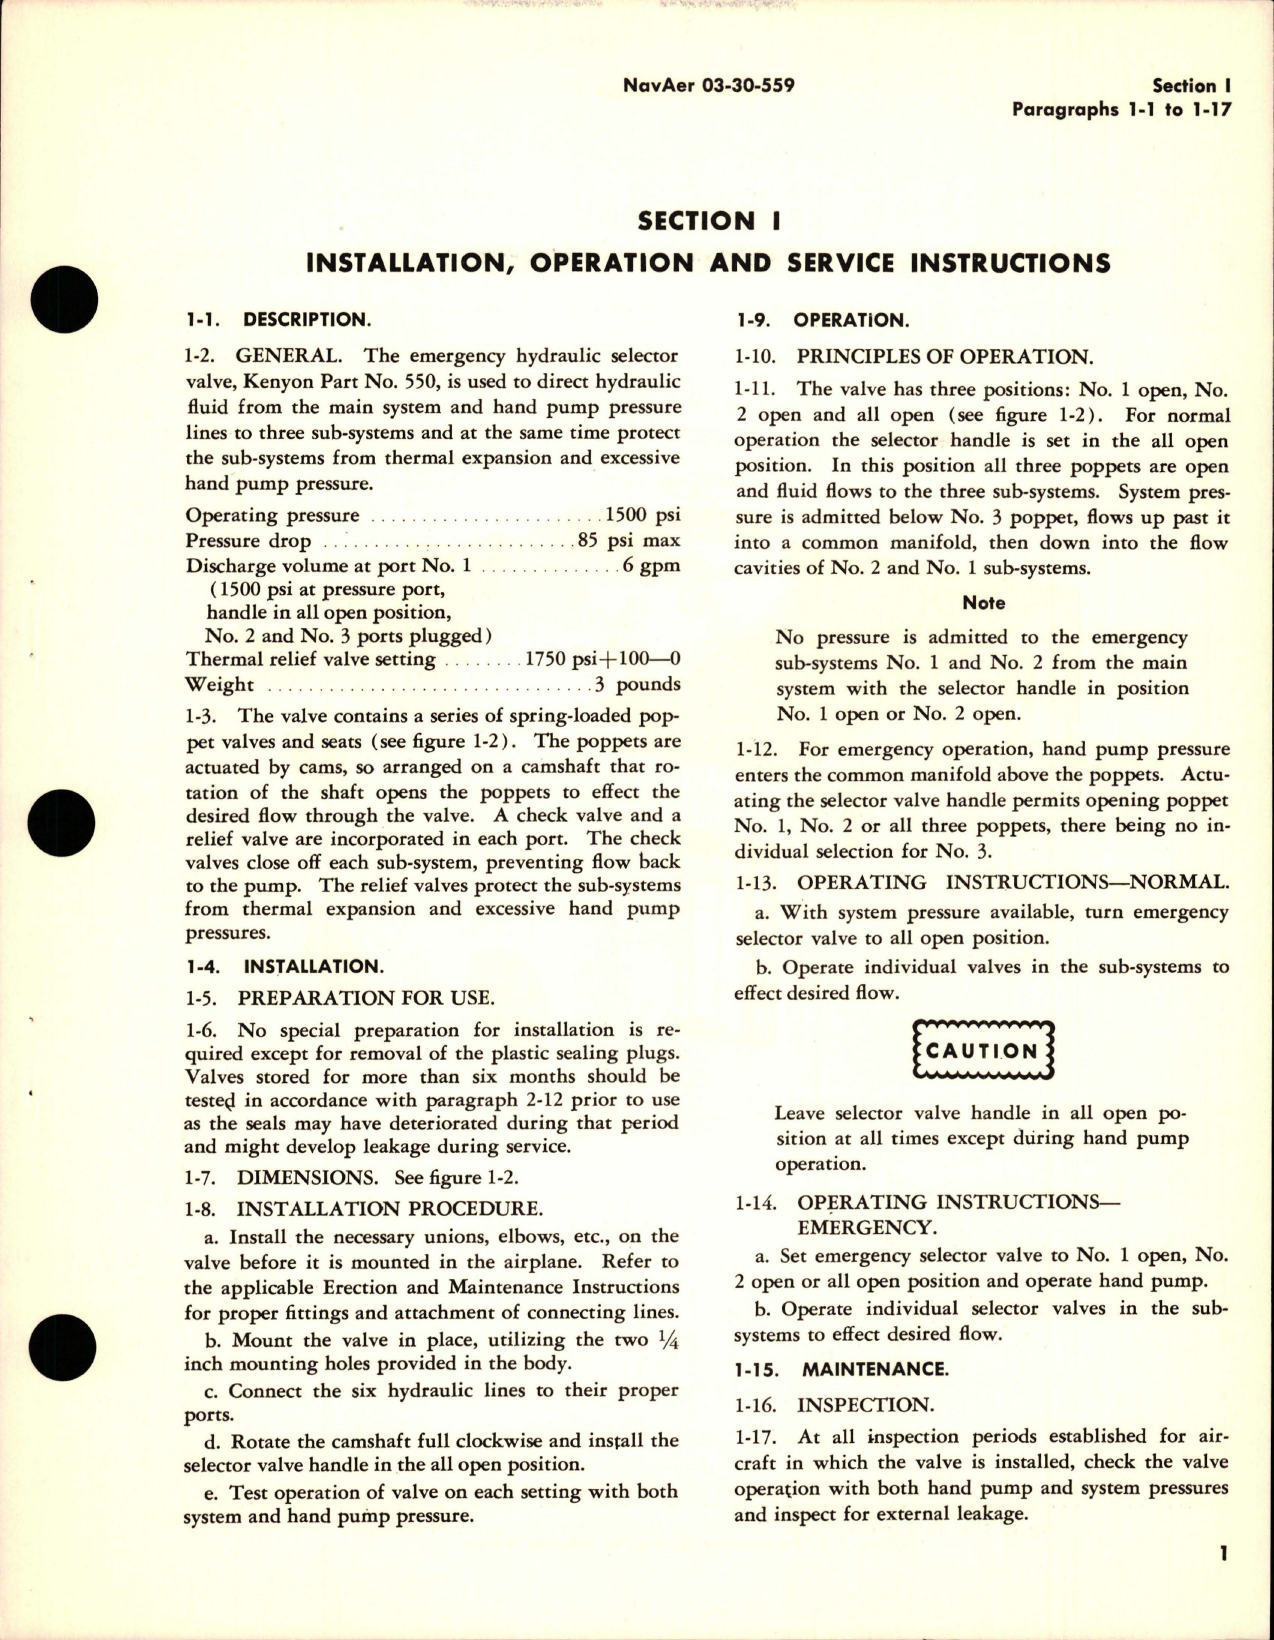 Sample page 5 from AirCorps Library document: Operation, Service and Overhaul Instructions with Parts Catalog for Emergency Hydraulic Selector Valve - Model 550